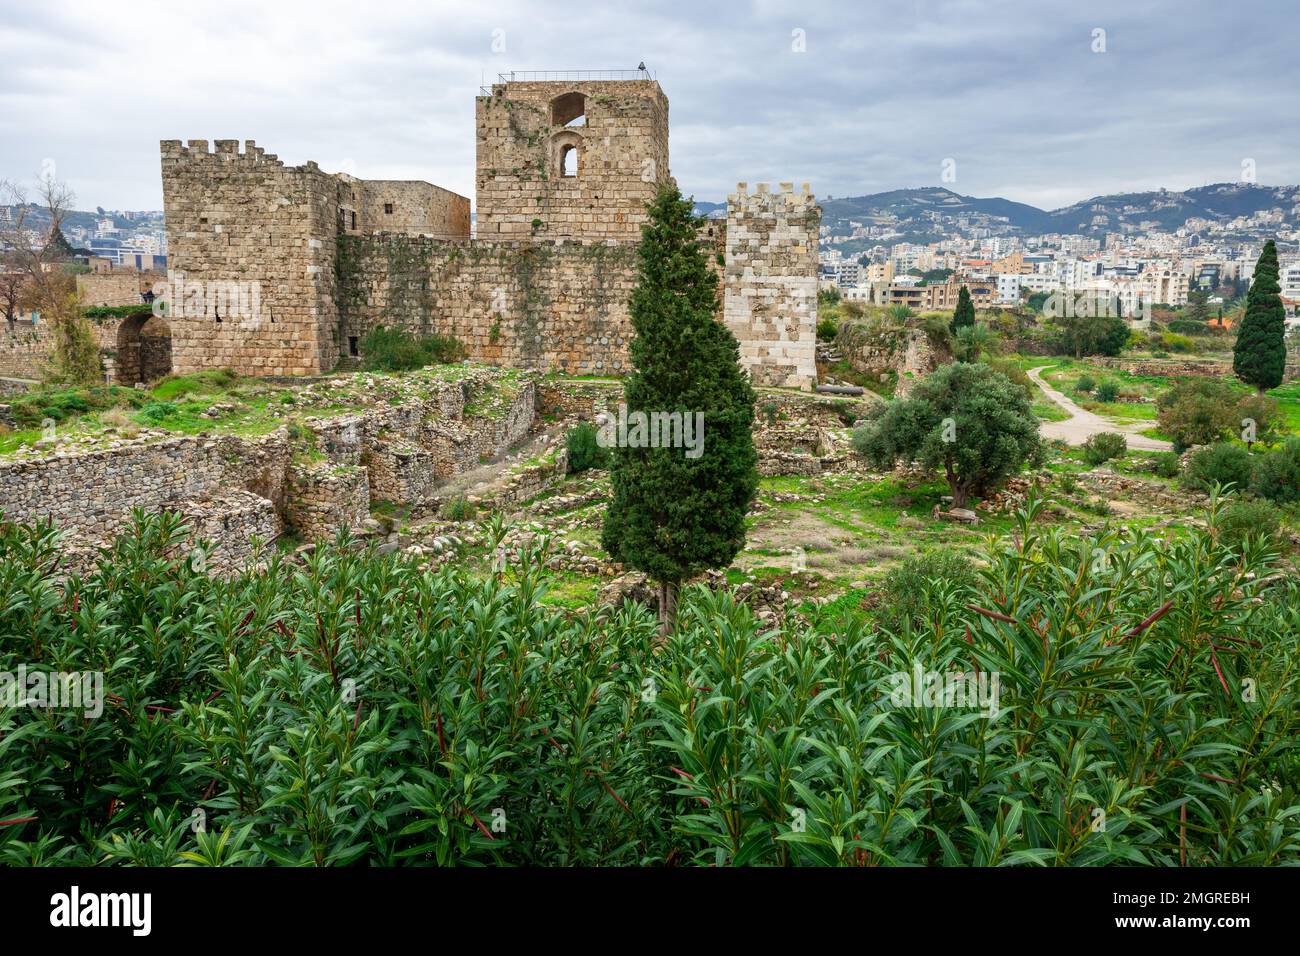 Byblos Crusader Castle, Lebanon. It was built by the Crusaders in the 12th century, one of oldest continuously inhabited cities in the world, Byblos, Stock Photo